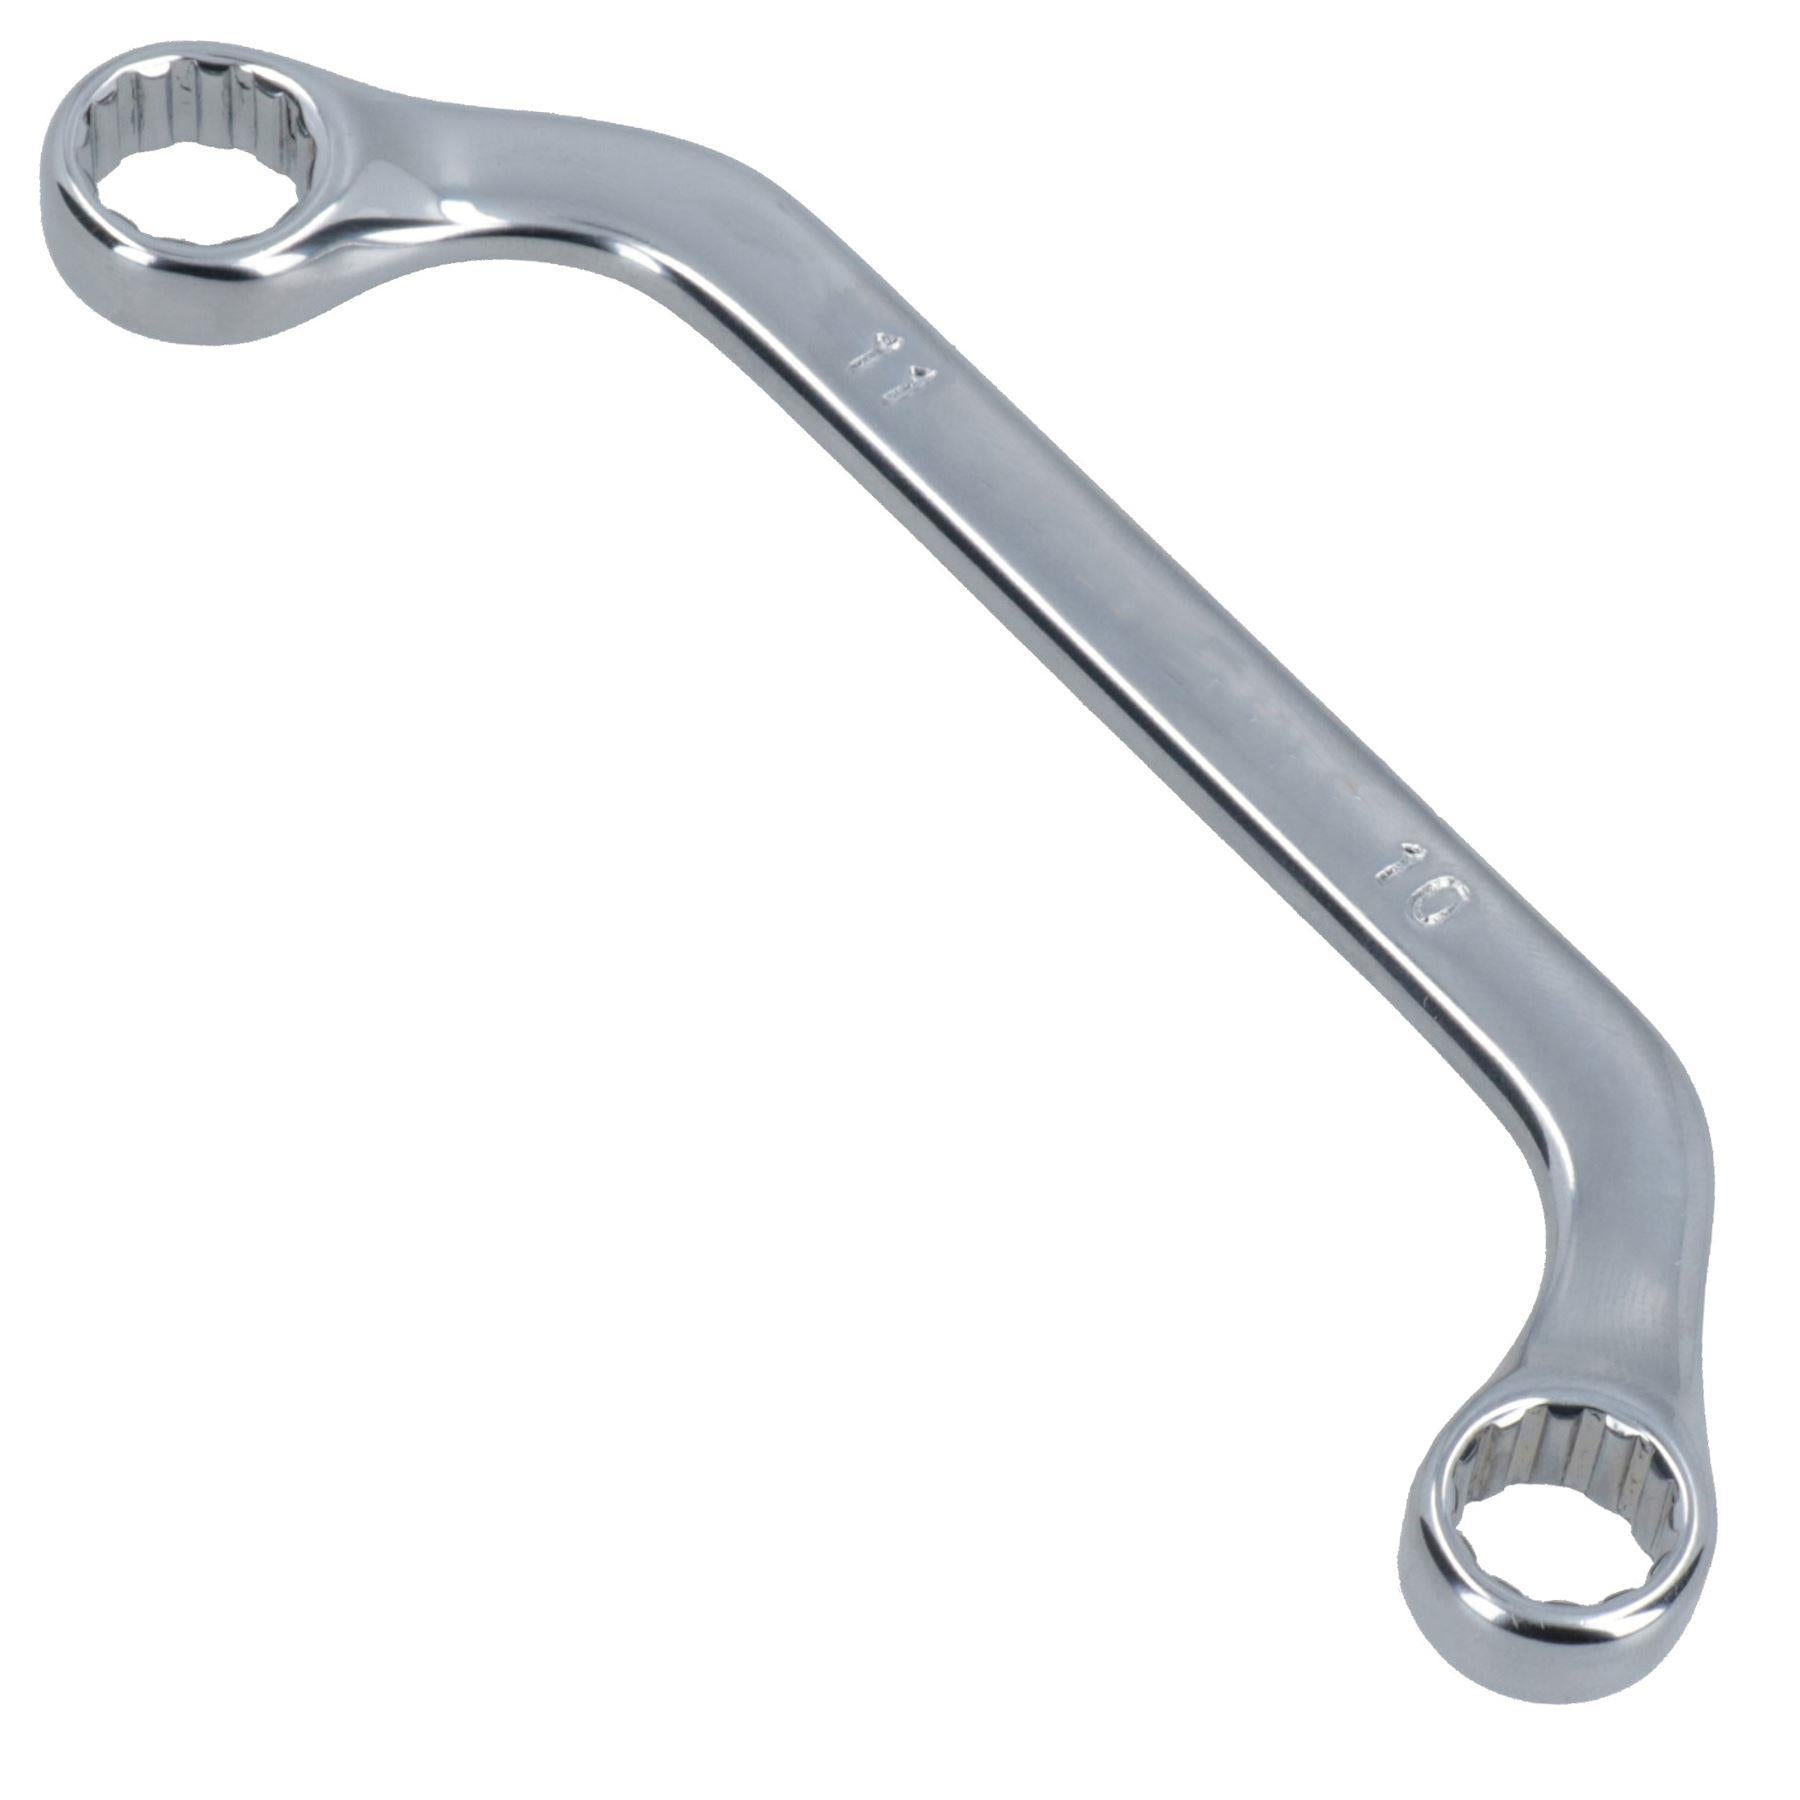 Metric Half Moon Ring C Obstruction Spanner Wrench 12 Sided Bi-hex 10 – 19mm